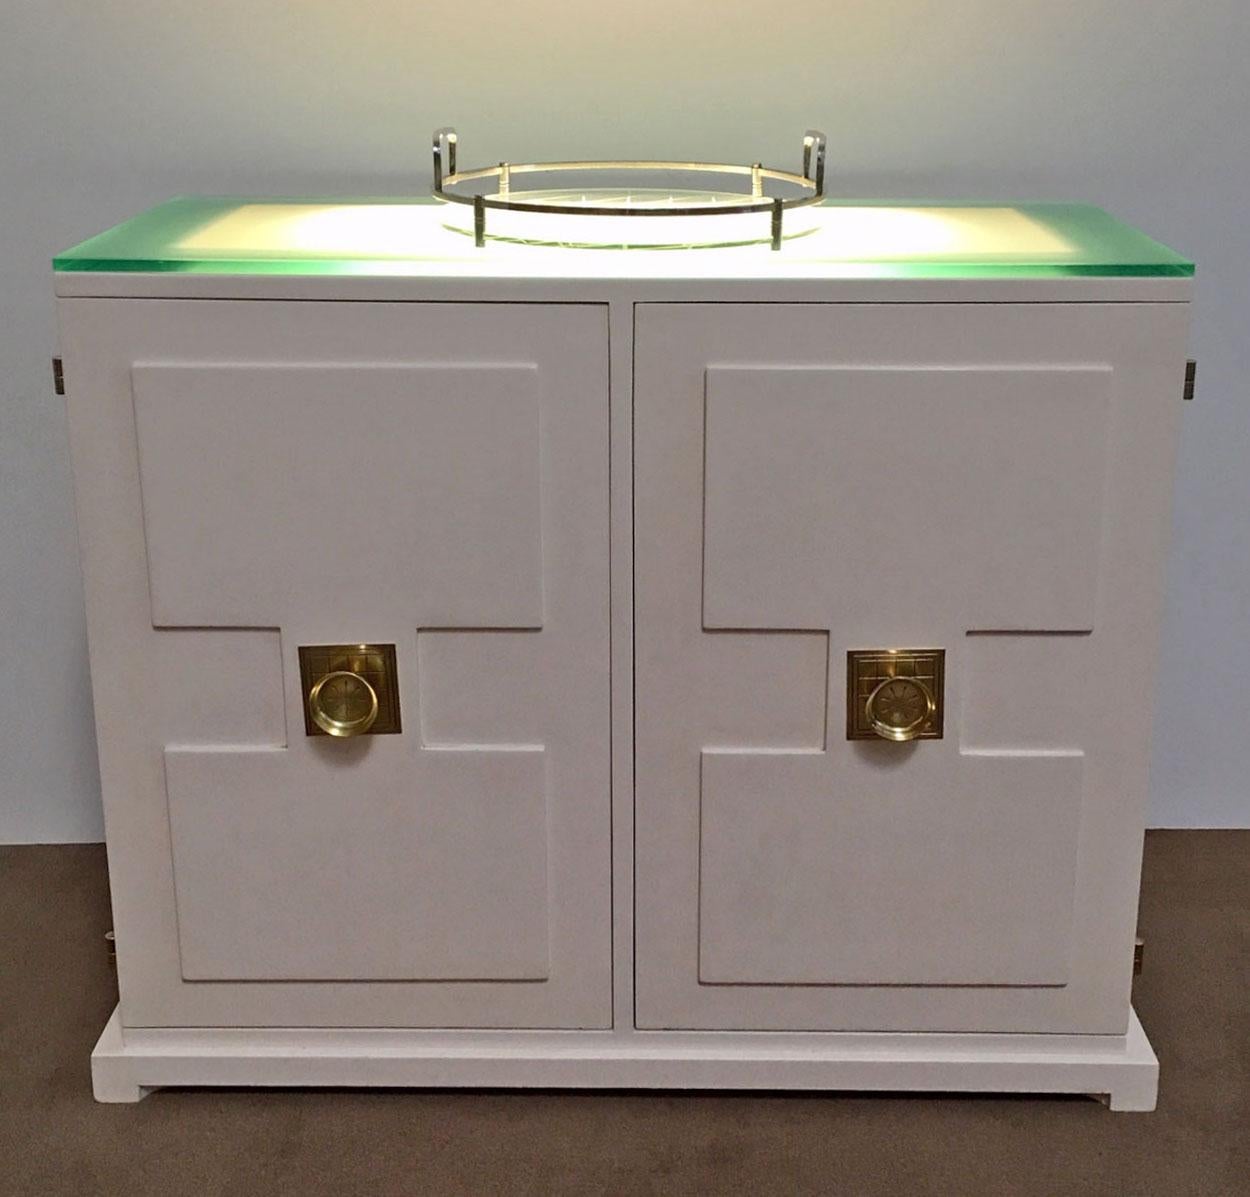 Illuminated two-door bar cabinet designed by Tommi Parzinger. Features a frosted glass top that lights from underneath, two drawers, and adjustable shelves for storage. Handles and hinges are brass. This is a beautiful example of Parzinger's design.